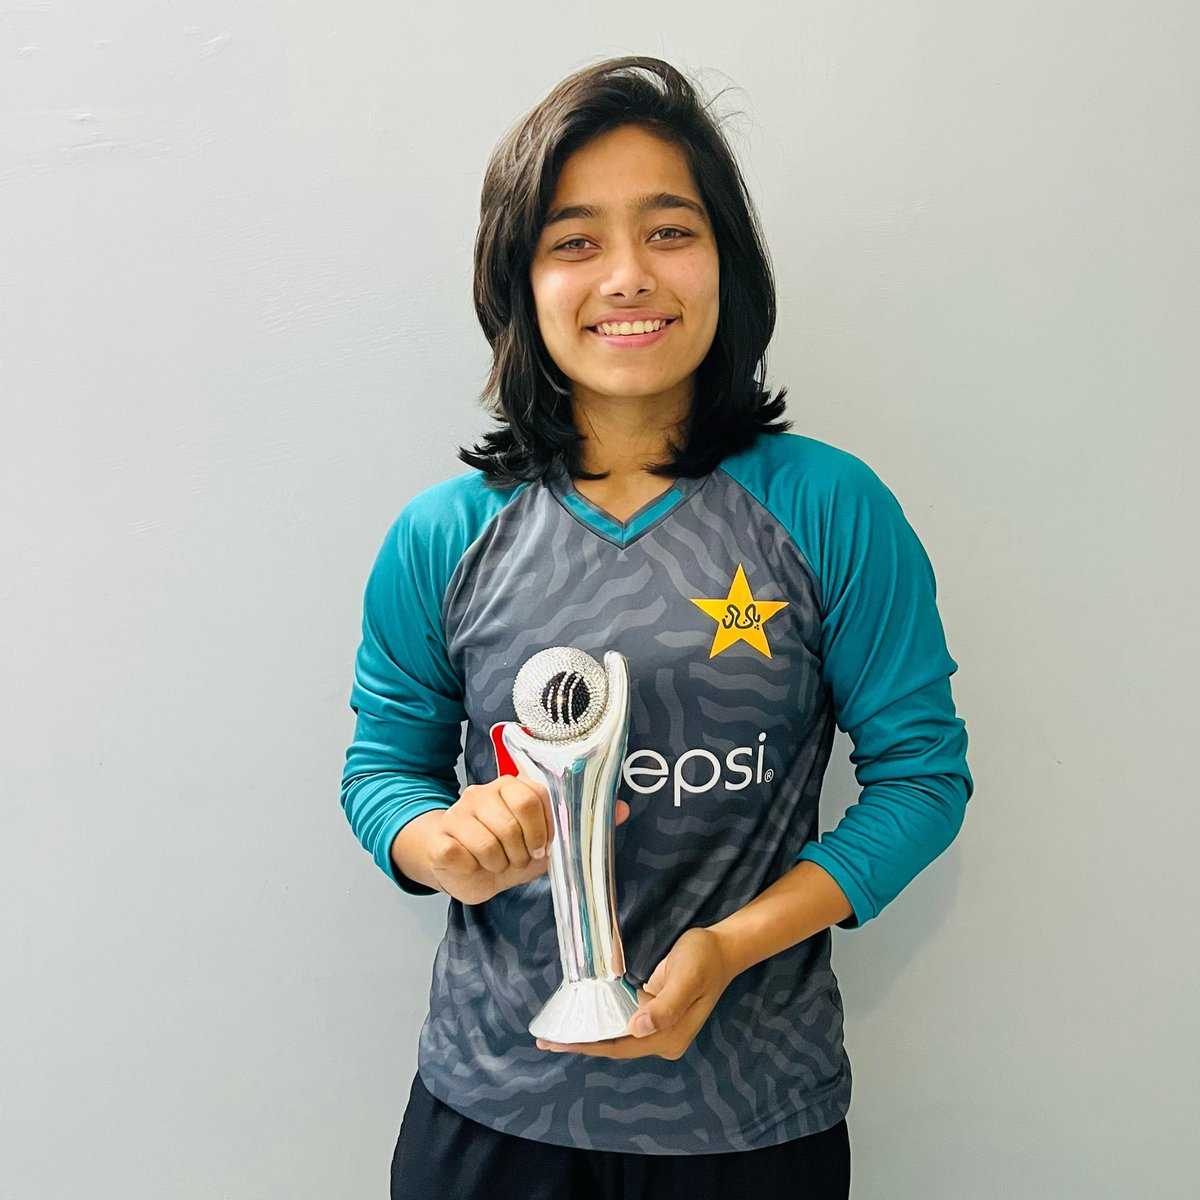 Alhumdullilah ❤️
It’s an absolute honor to receive the trophy of @ICC Women's Emerging Cricketer Of The Year.

Onwards and upwards InshaAllah🤞🏼
Pakistan Zindabad 🇵🇰

#iccawards2021 #icc #emergingcricketer #pcb #blessed